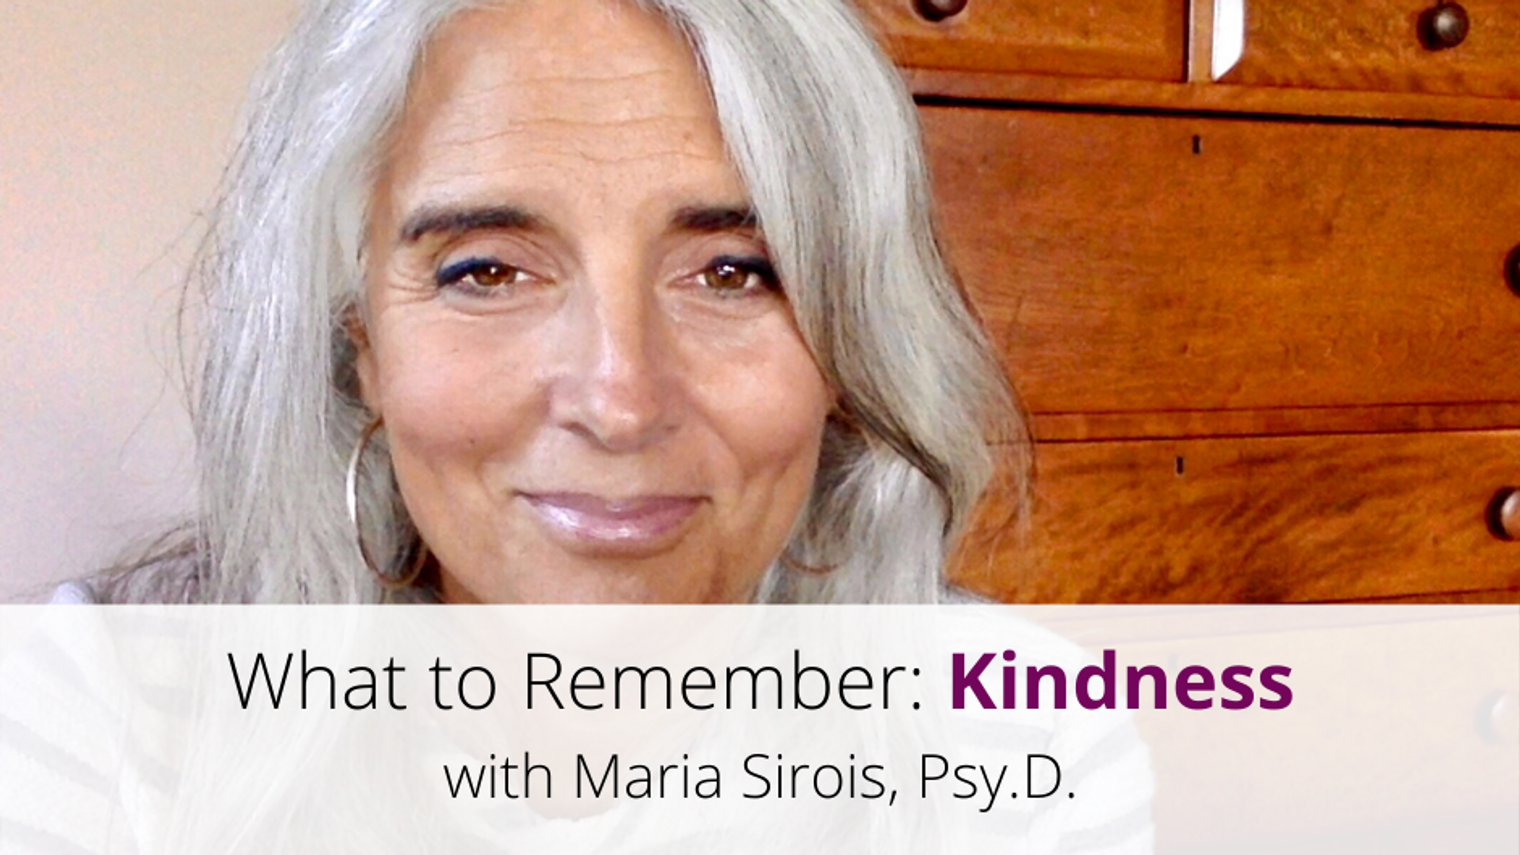 Kindness: What to Remember, Video 7 of 18